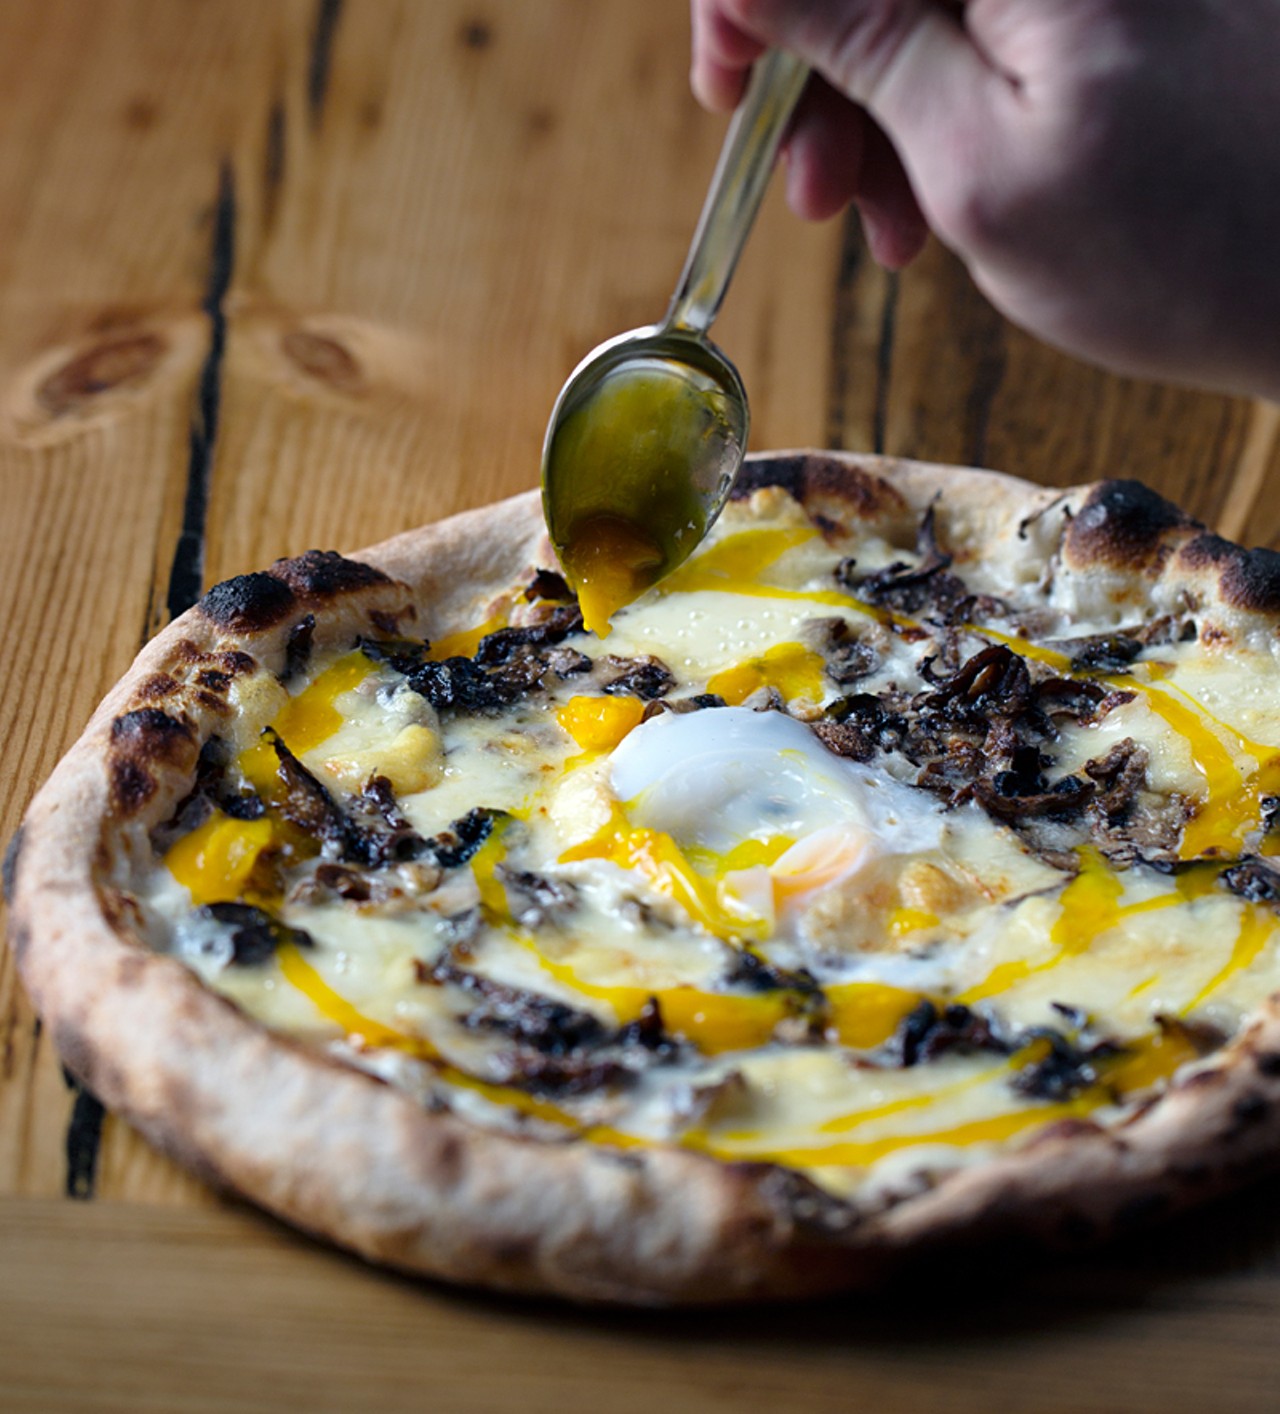 The "Donald" is a wood-fired pizza with wild mushrooms, duck egg and truffles.